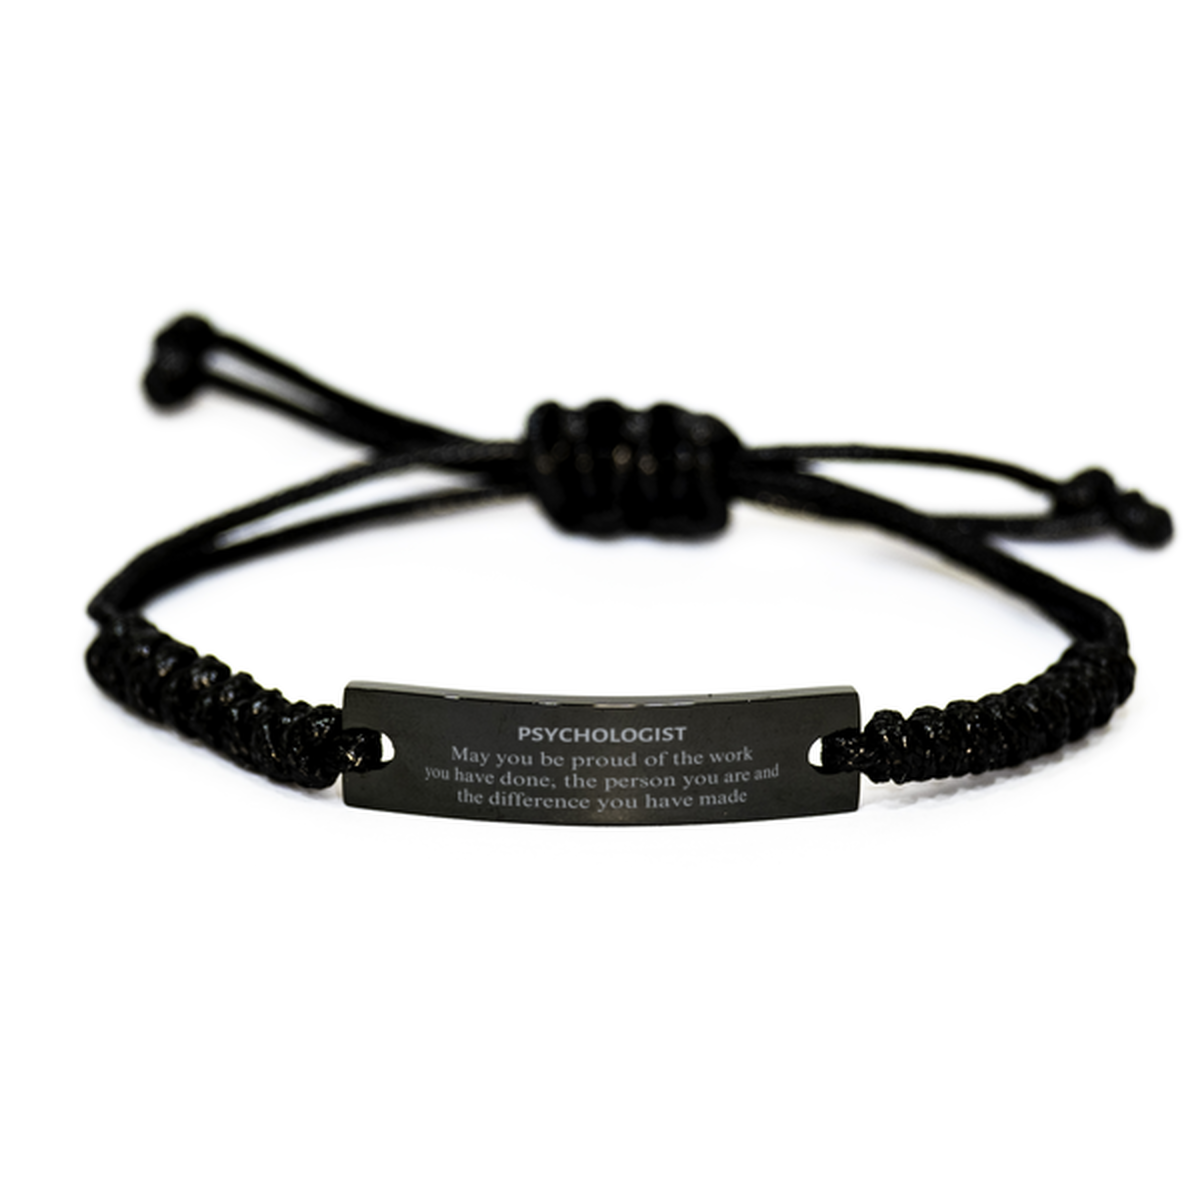 Psychologist May you be proud of the work you have done, Retirement Psychologist Black Rope Bracelet for Colleague Appreciation Gifts Amazing for Psychologist